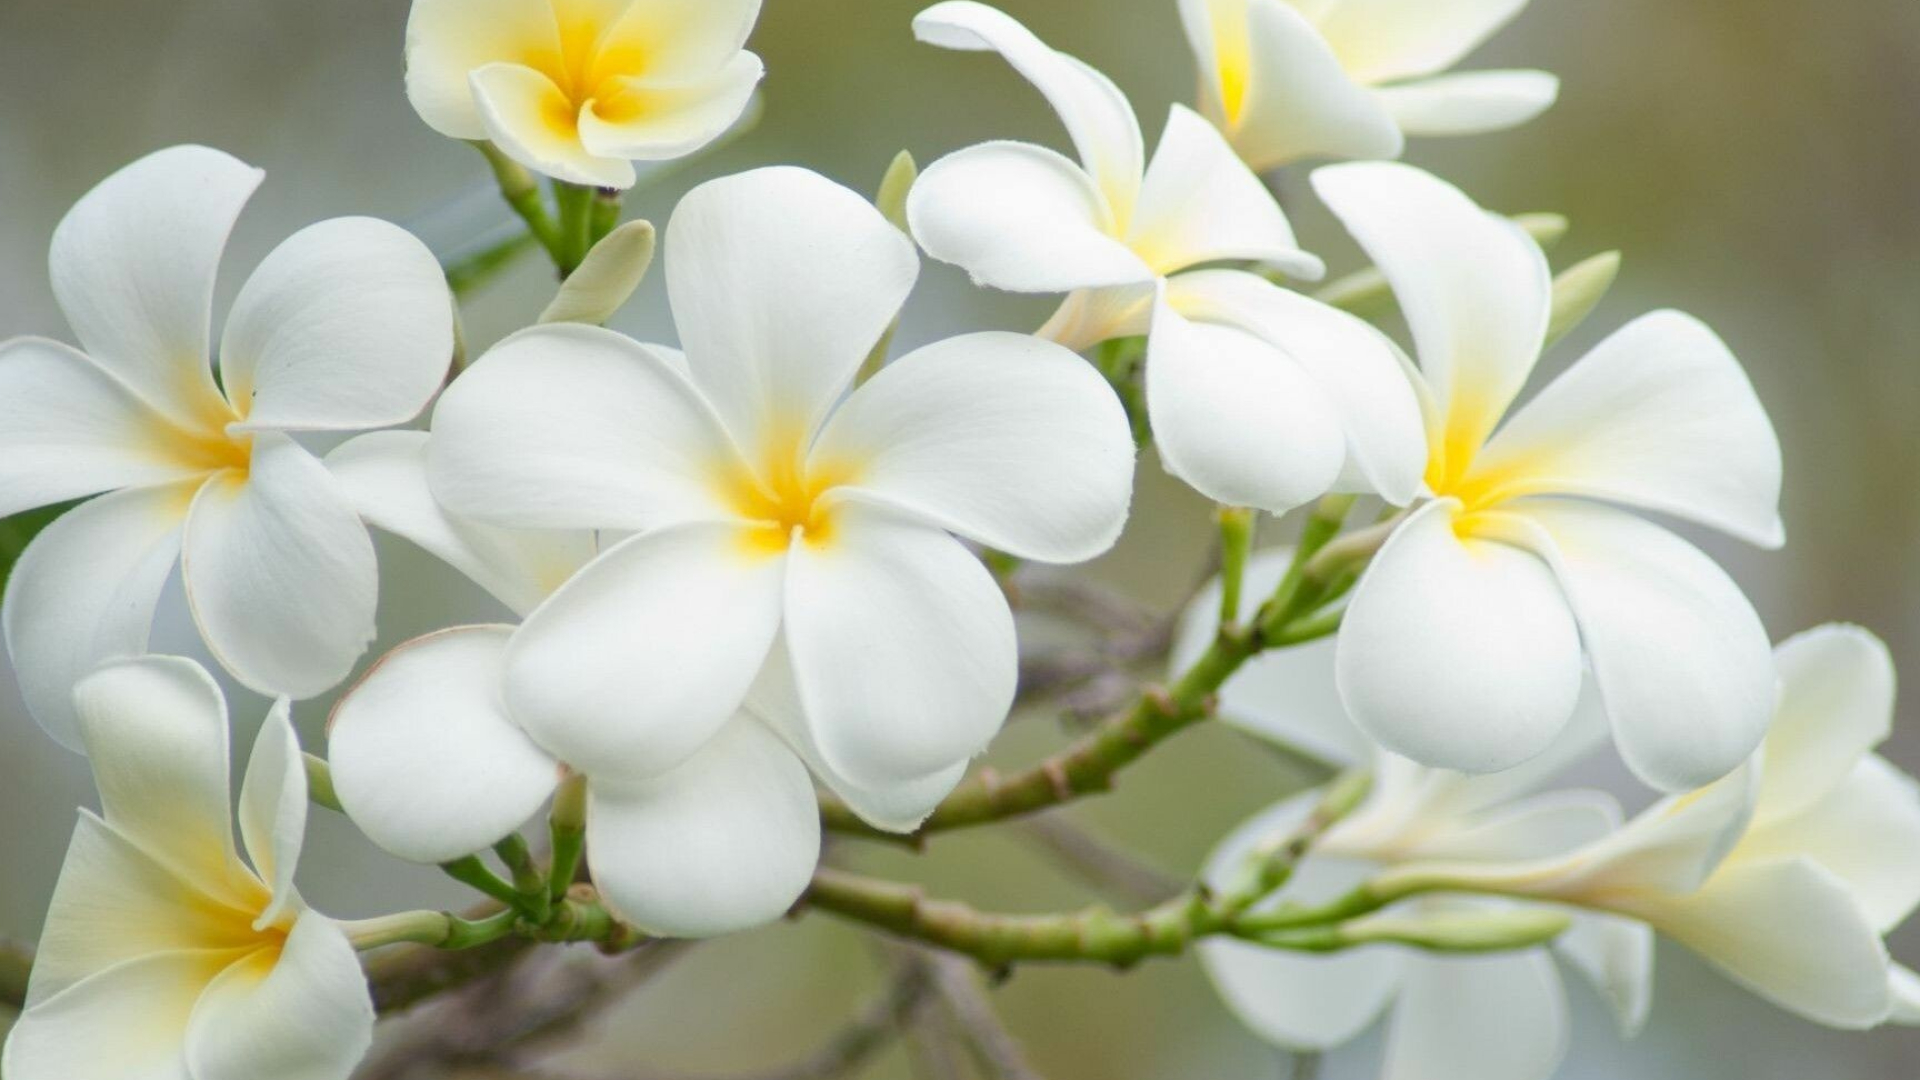 Frangipani Flower: Plumeria species have a milky latex that, like many other Apocynaceae contains poisonous compounds that irritate the eyes and skin. 1920x1080 Full HD Background.